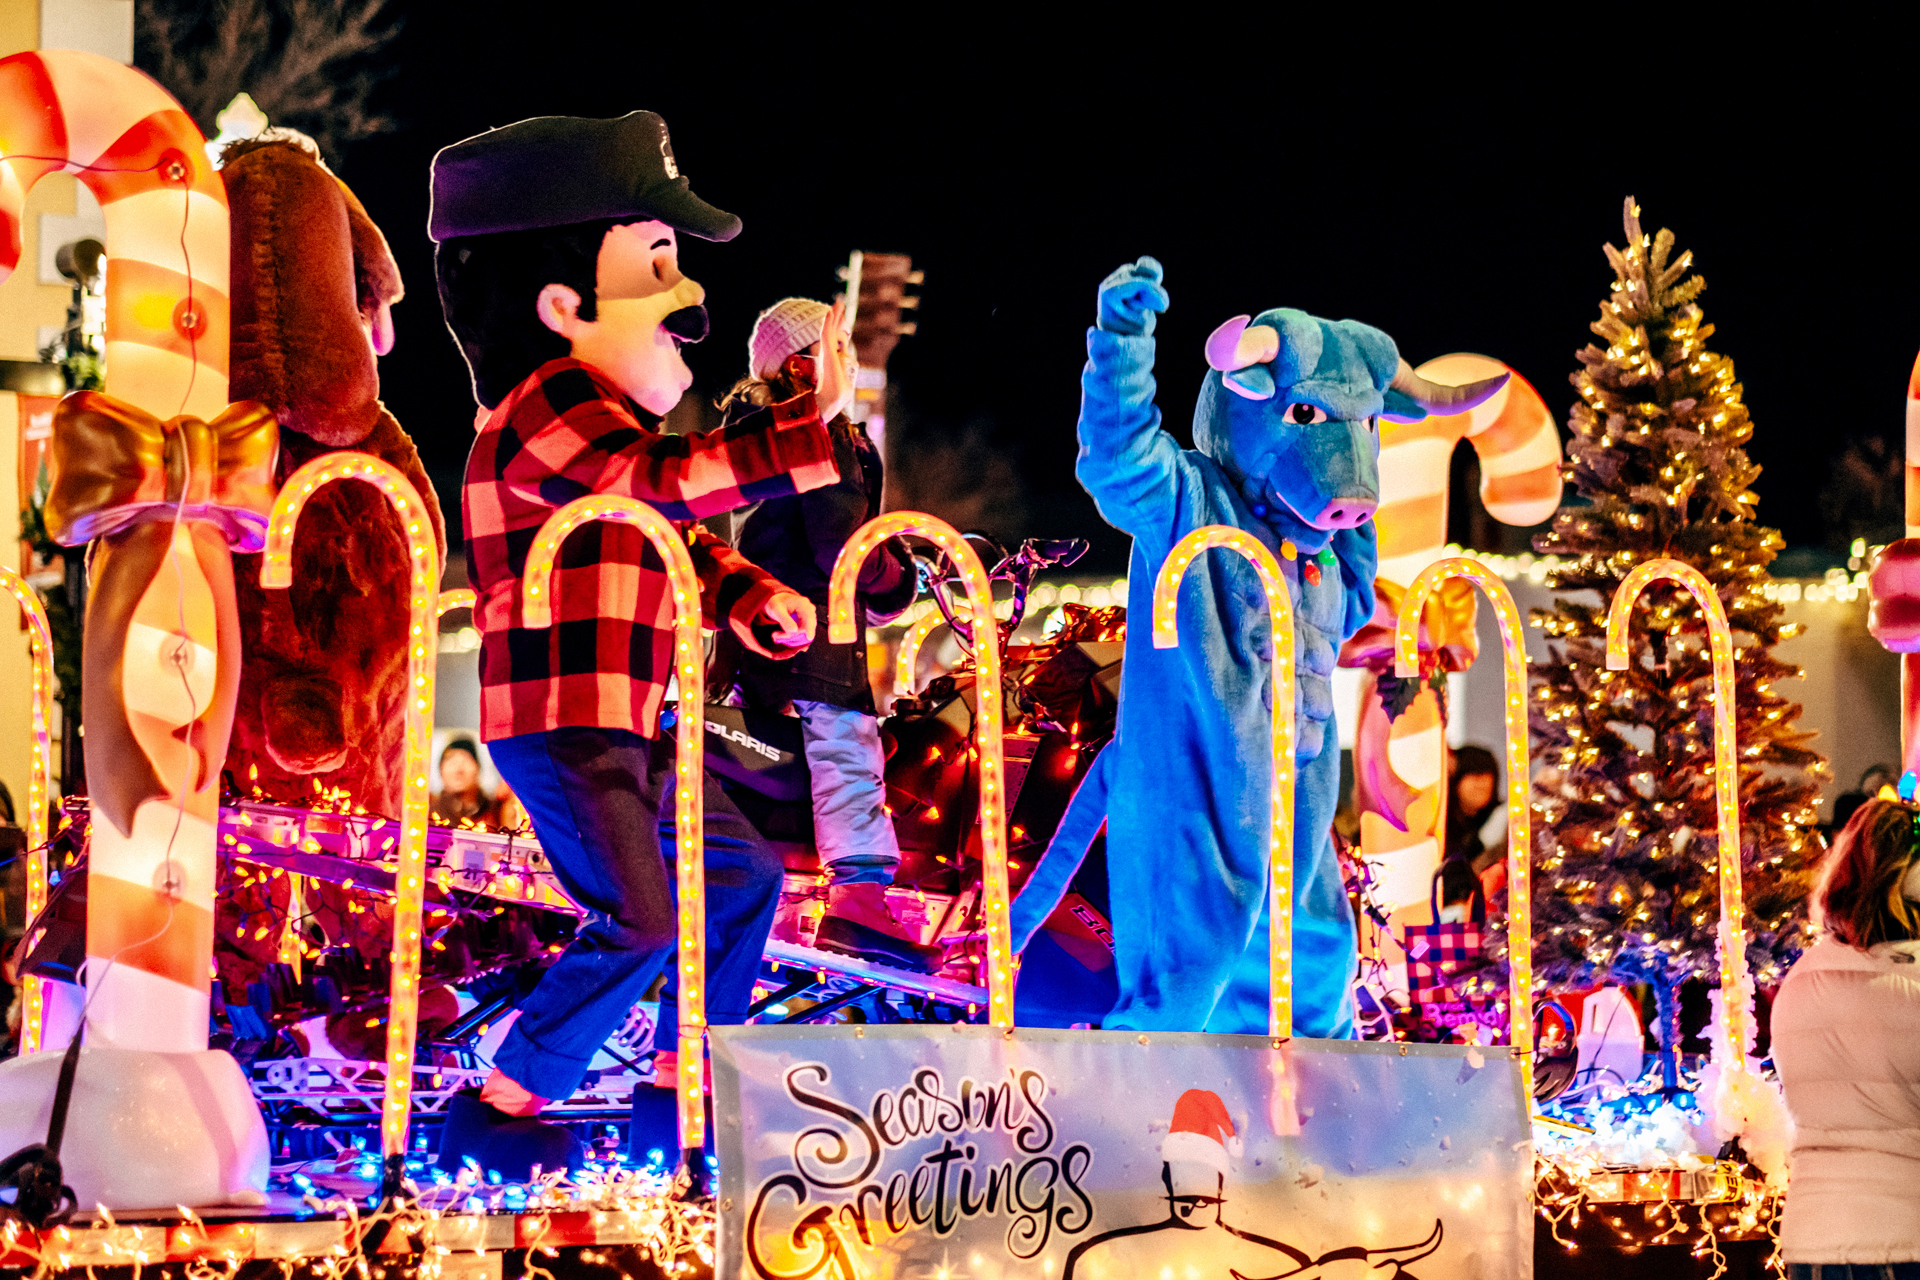 Paul Bunyan & Babe The Blue Ox mascots riding on a float.